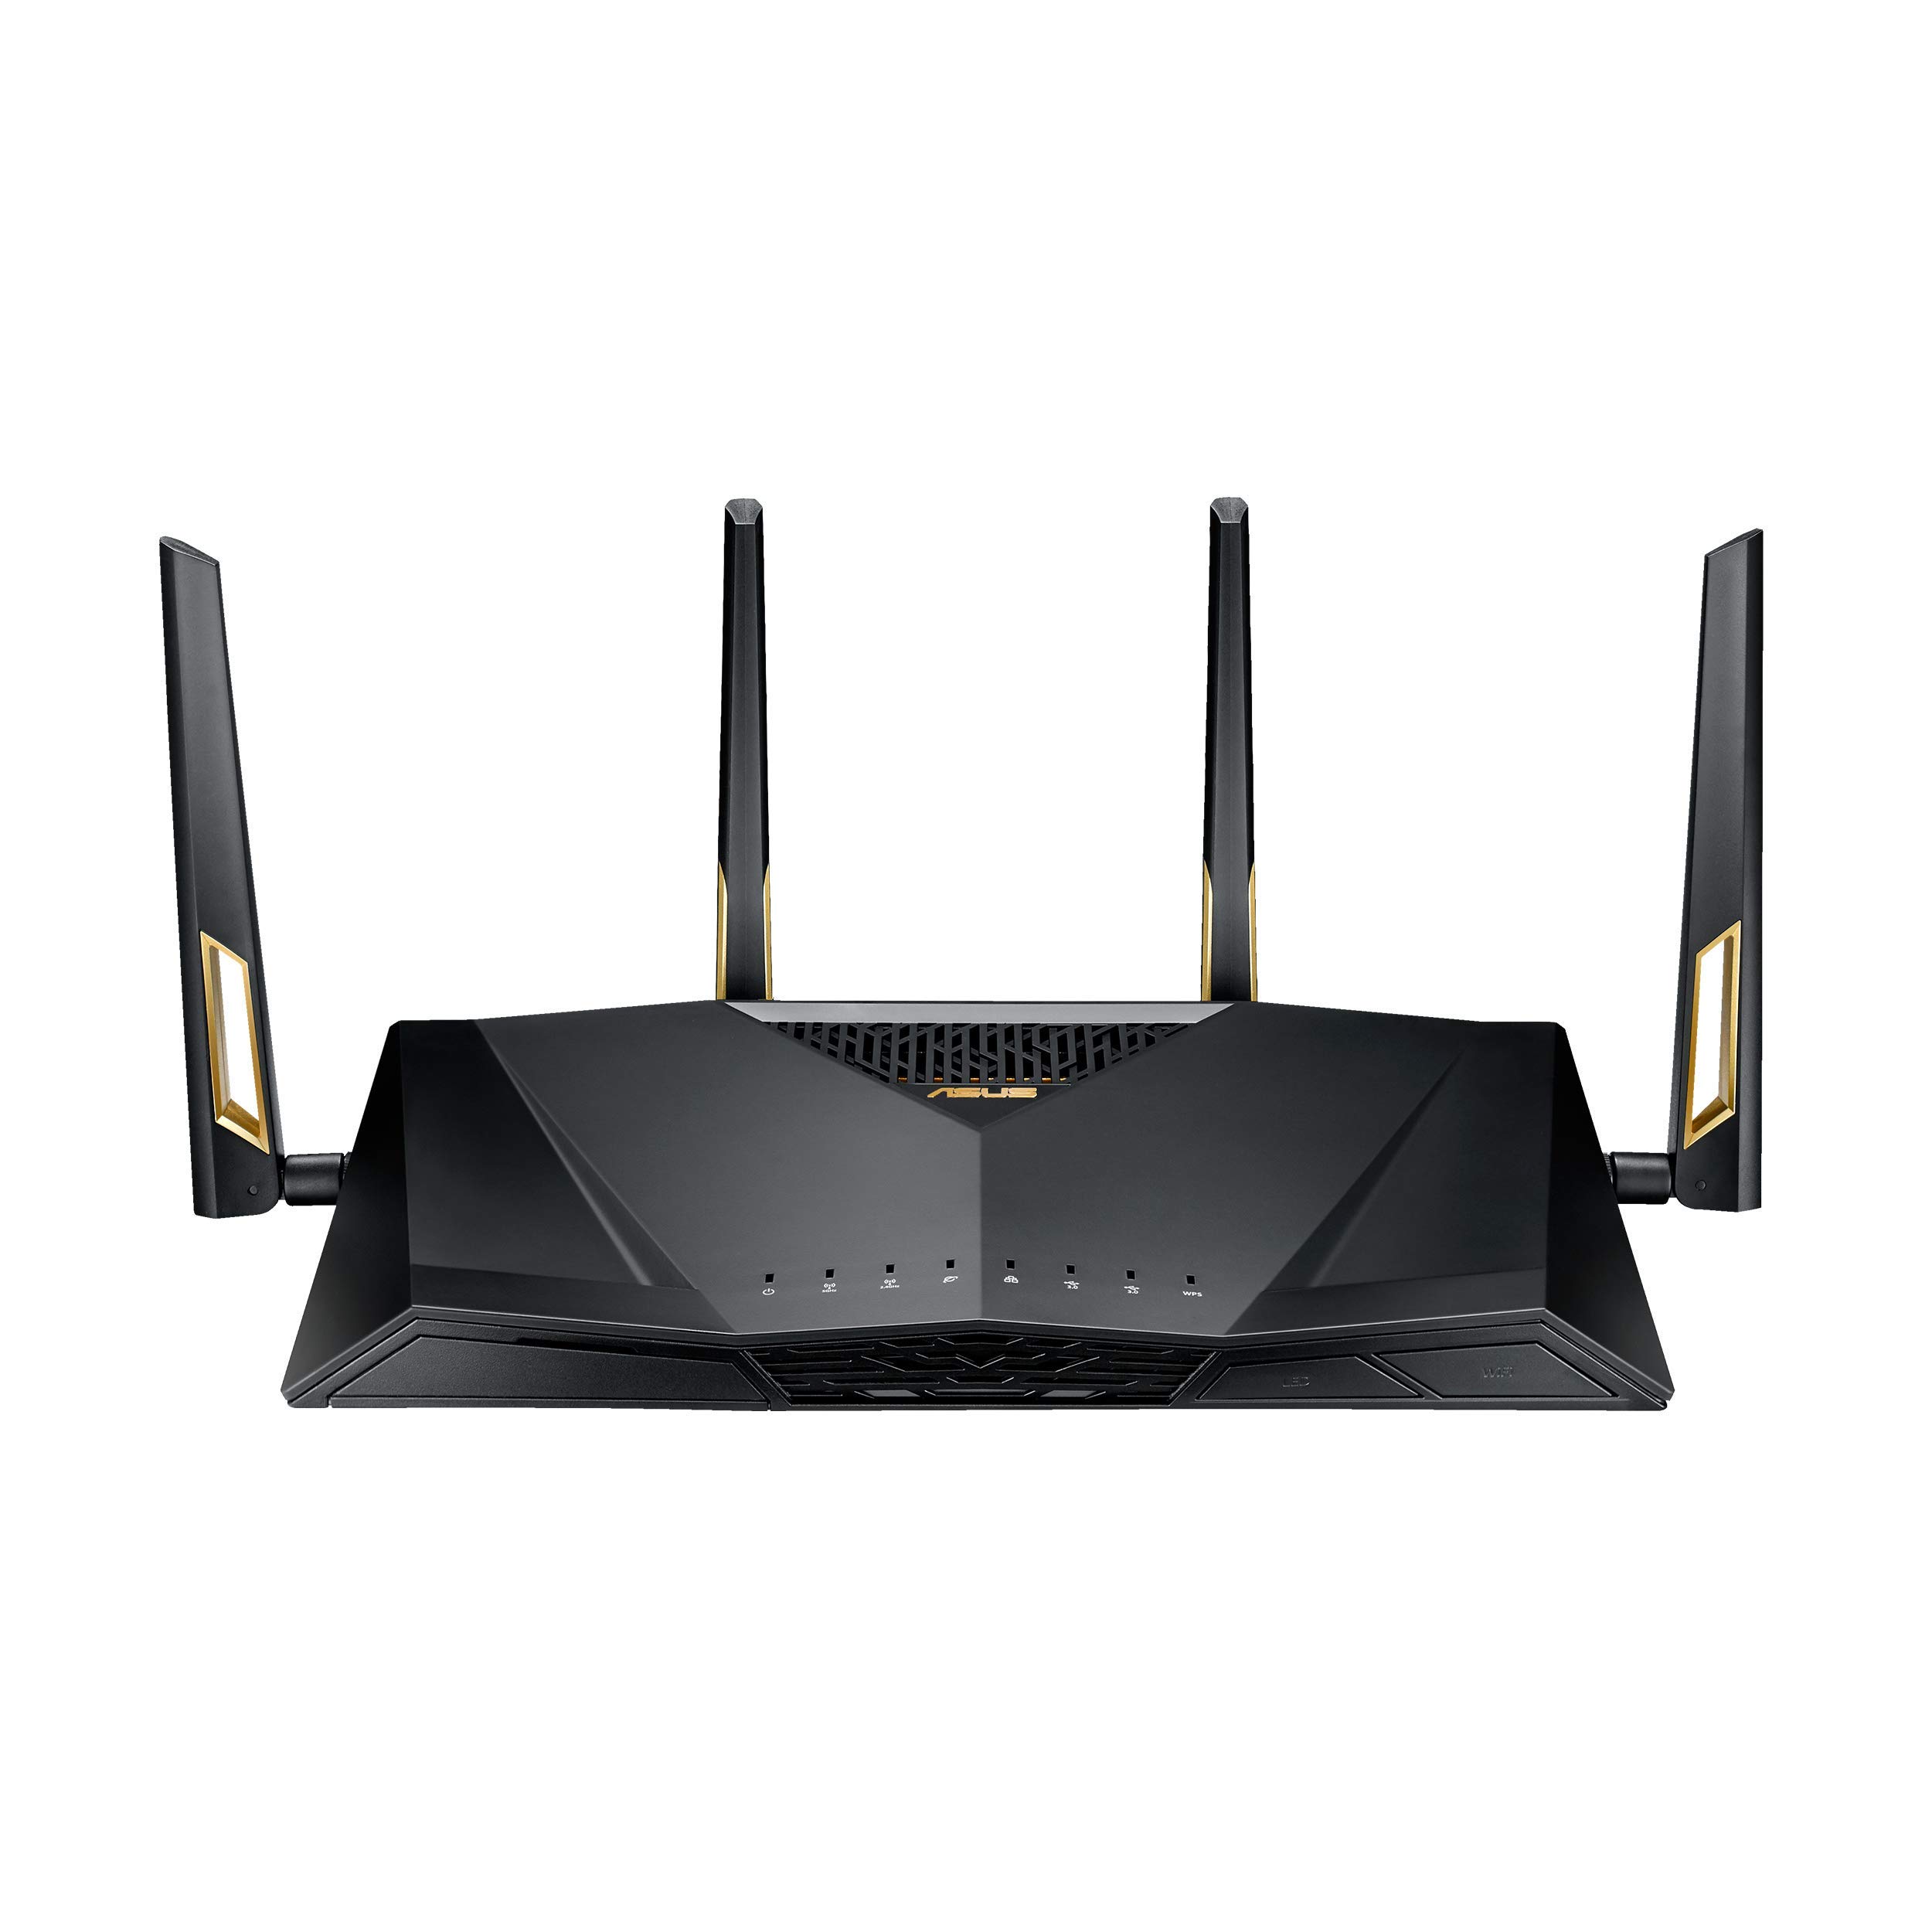 Asus RT-AXE7800 Tri-Band WiFi 6E (802.11ax) Router, 6GHz Band, Safe Browsing, Upgraded Network Security, Instant Guard, Built-in VPN Features